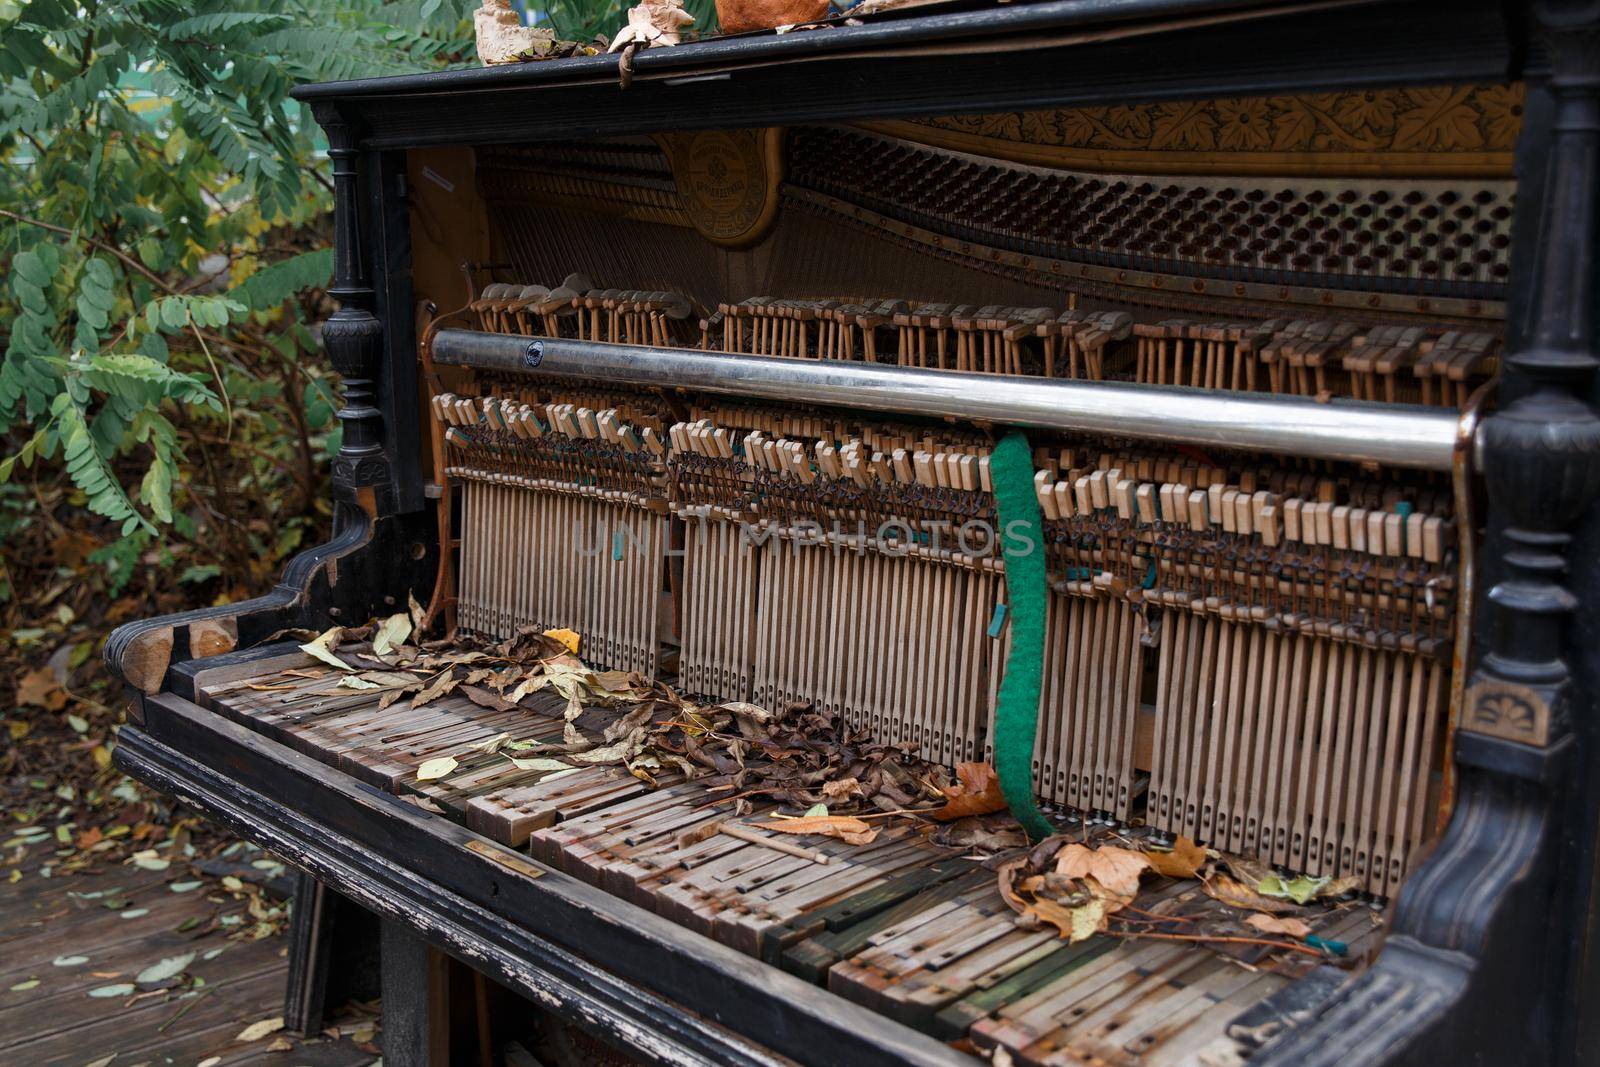 The insides of an old ruined piano standing outdoors